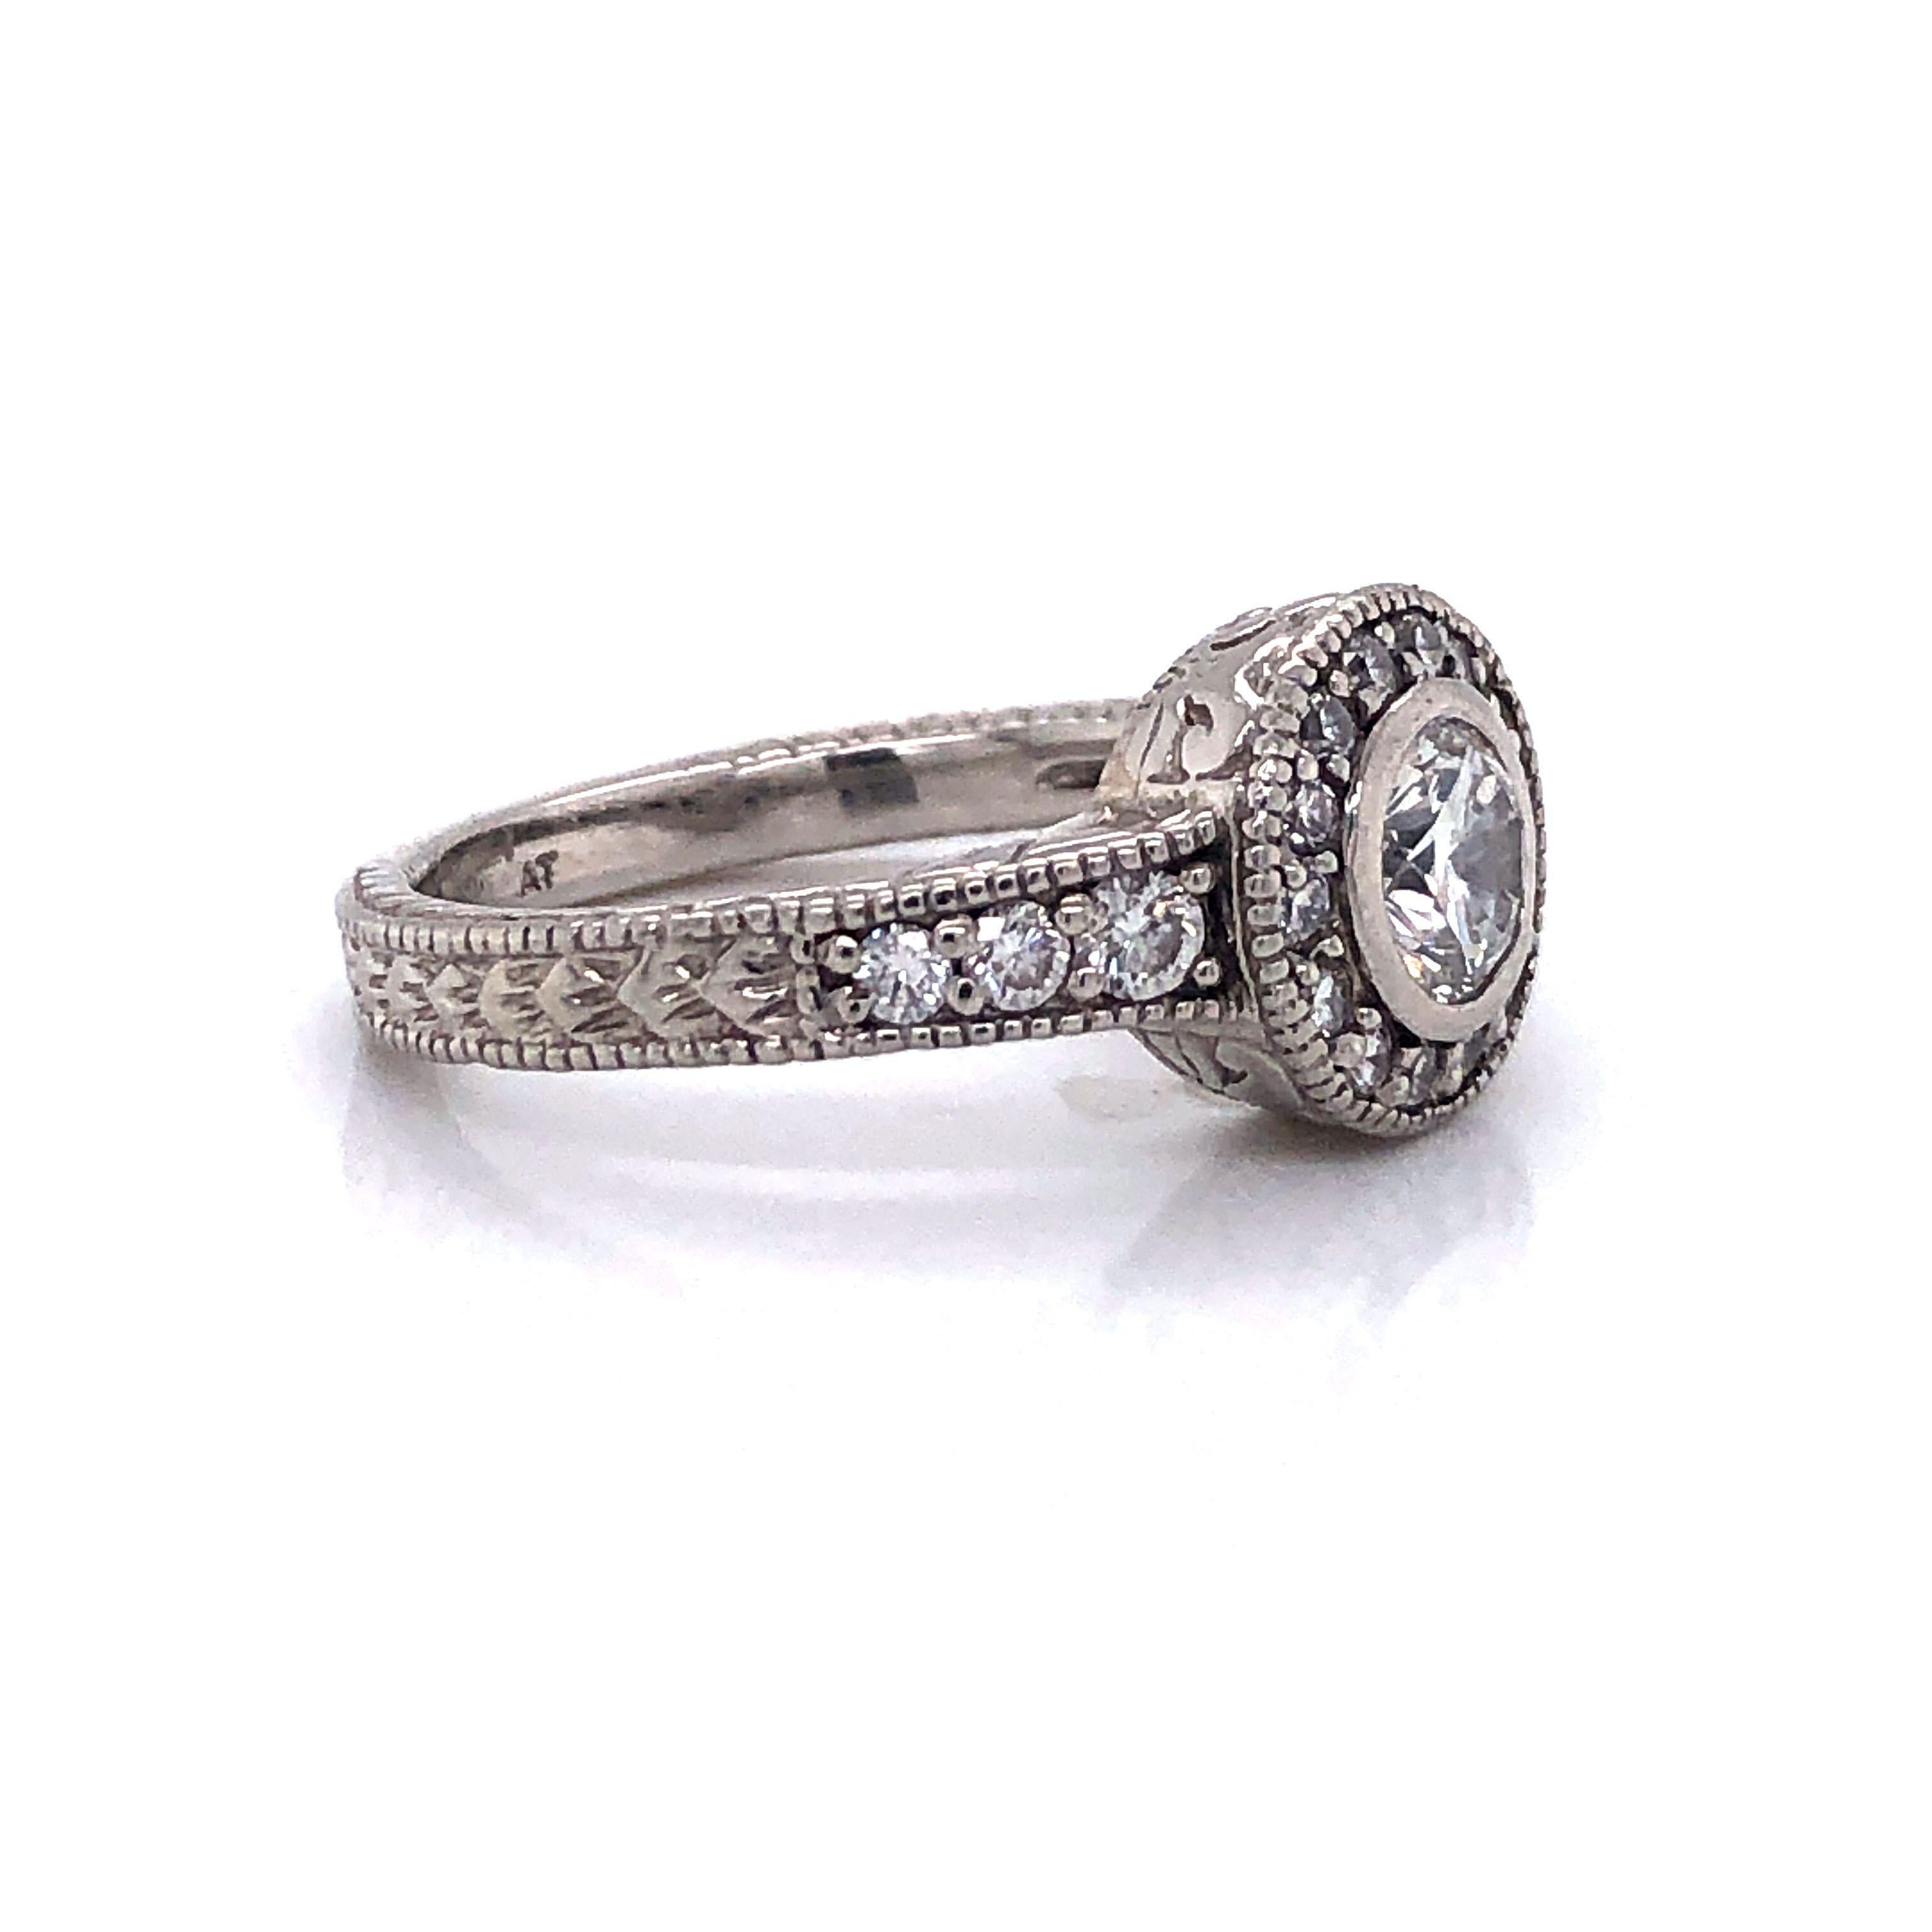 Vintage Platinum and .83cttw Diamond Halo Engagement Ring Size 5.75

Condition:  Very Good Condition
Metal:  Platinum (Marked, and Professionally Tested)
Weight:  7.4g
Center Diamond:  Round Cut .5ct
Center Diamond:  Color H
Center Diamond:  Clarity